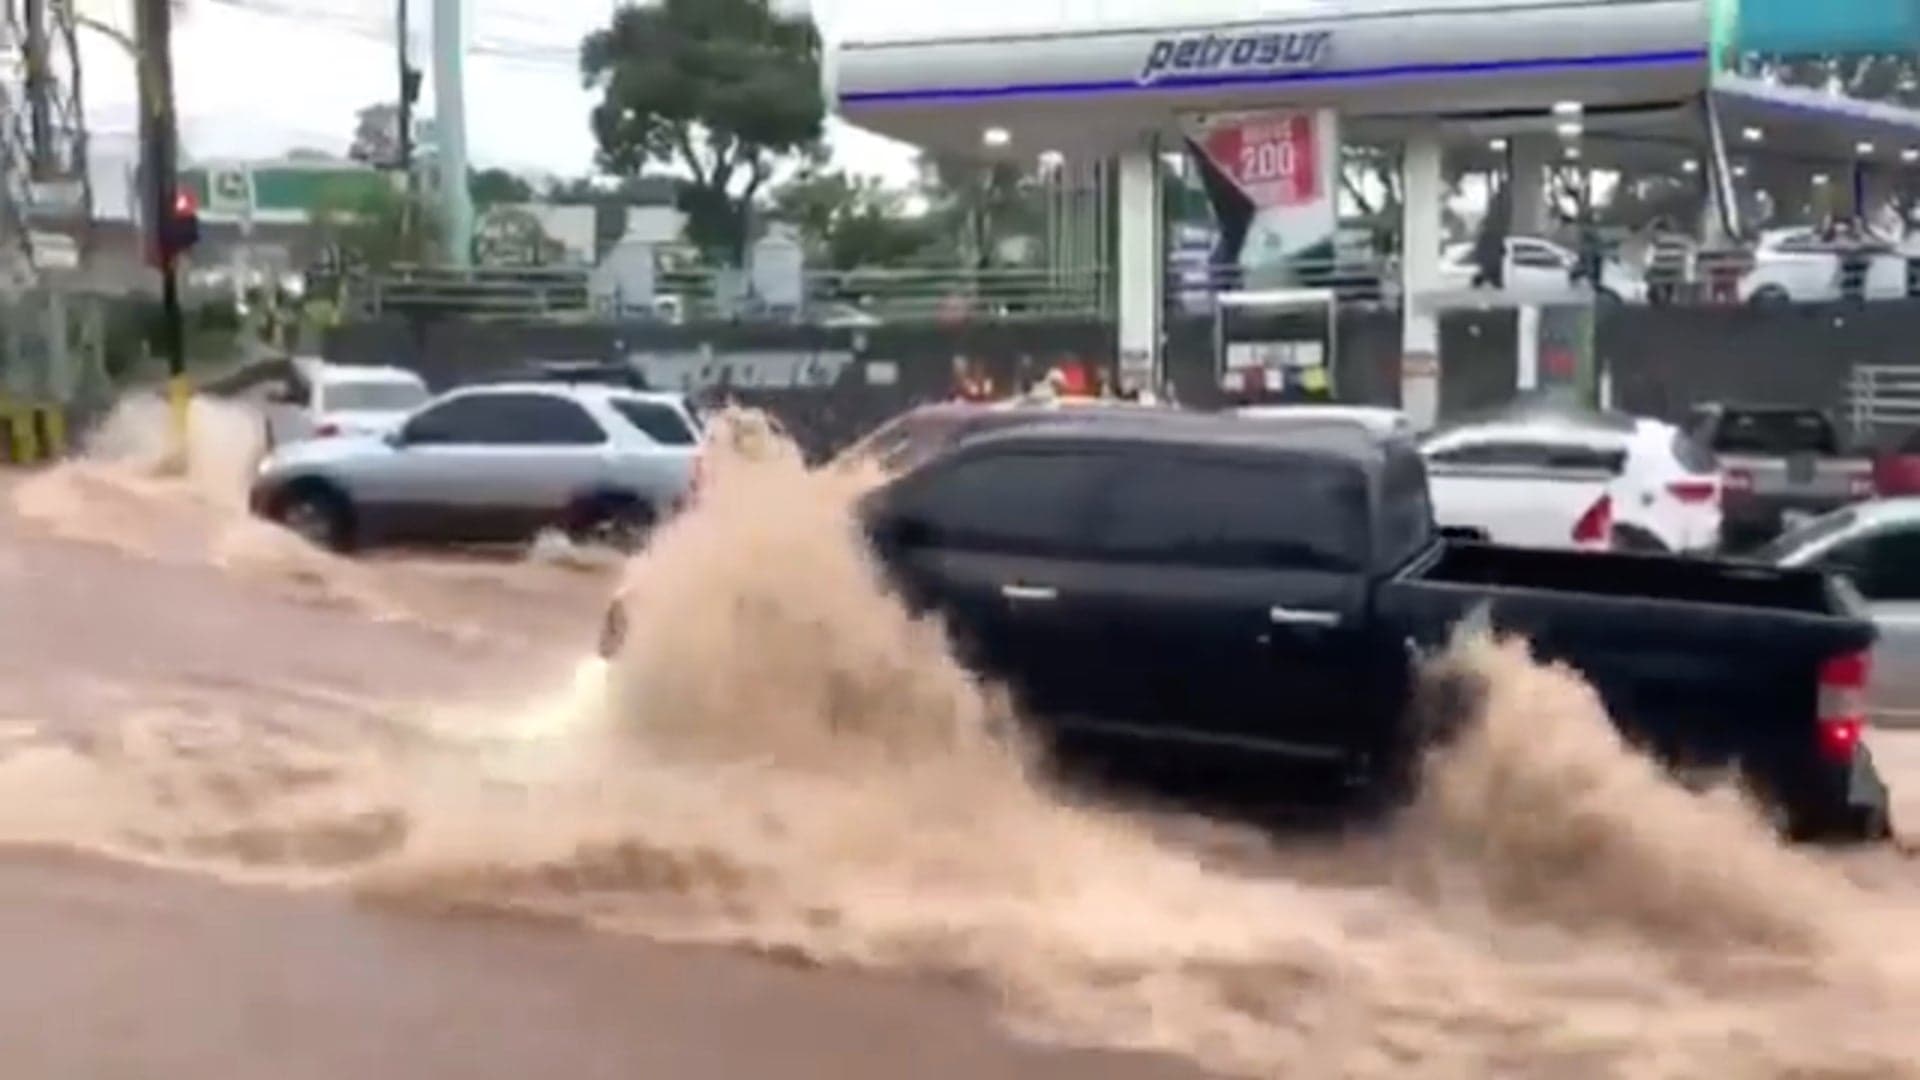 Watch a Ballsy Toyota Tundra Owner Drive Through a Raging Flash Flood Like It’s Nothing